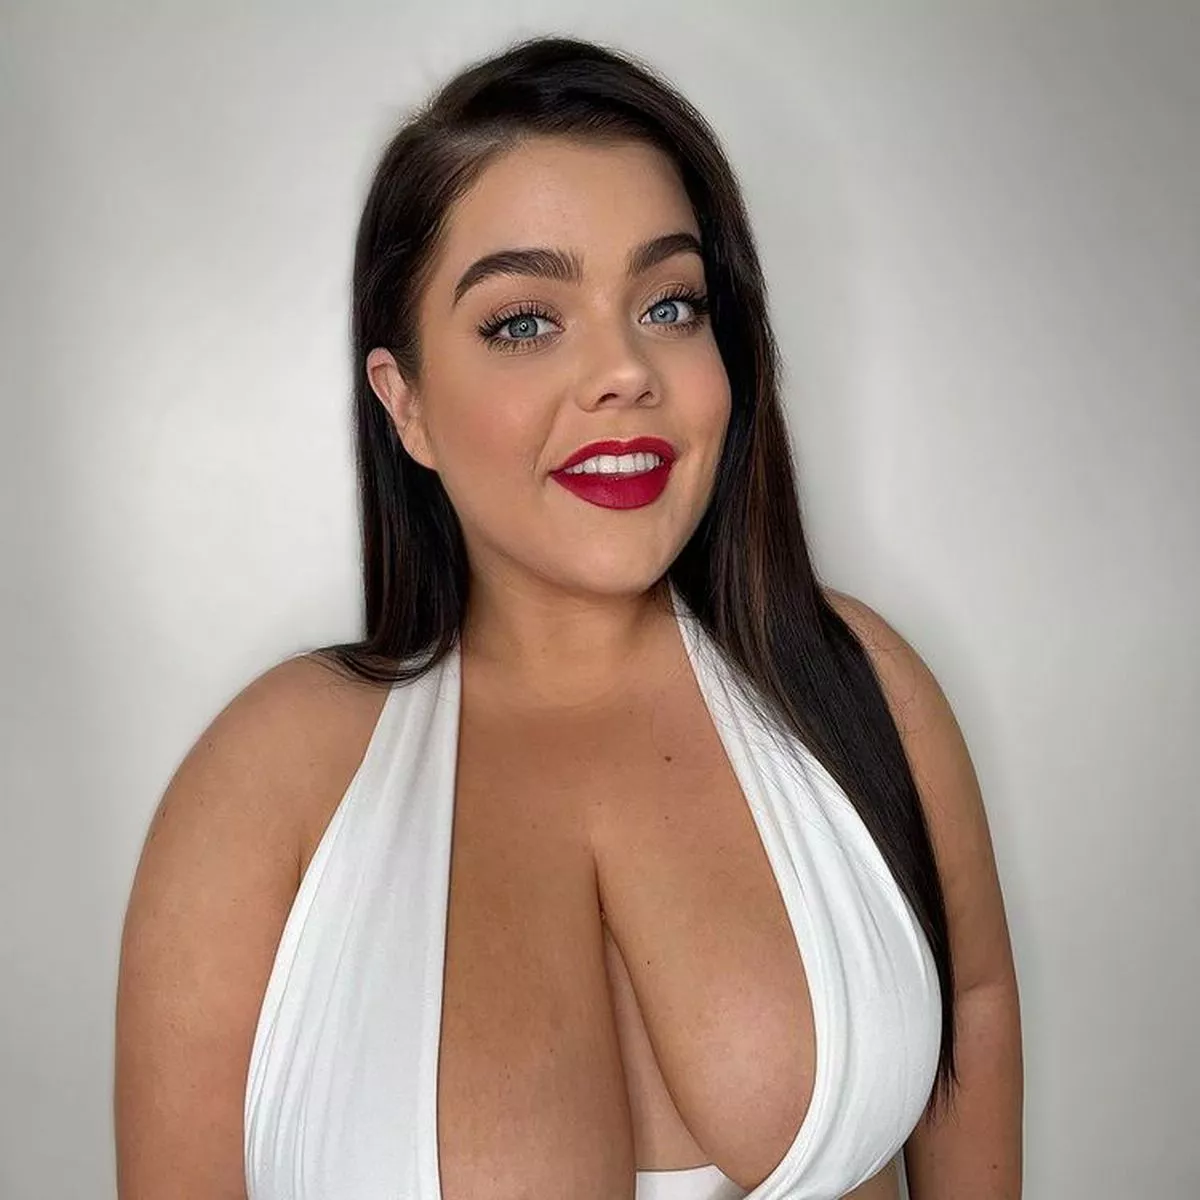 claire wilber recommends why do i like big tits pic